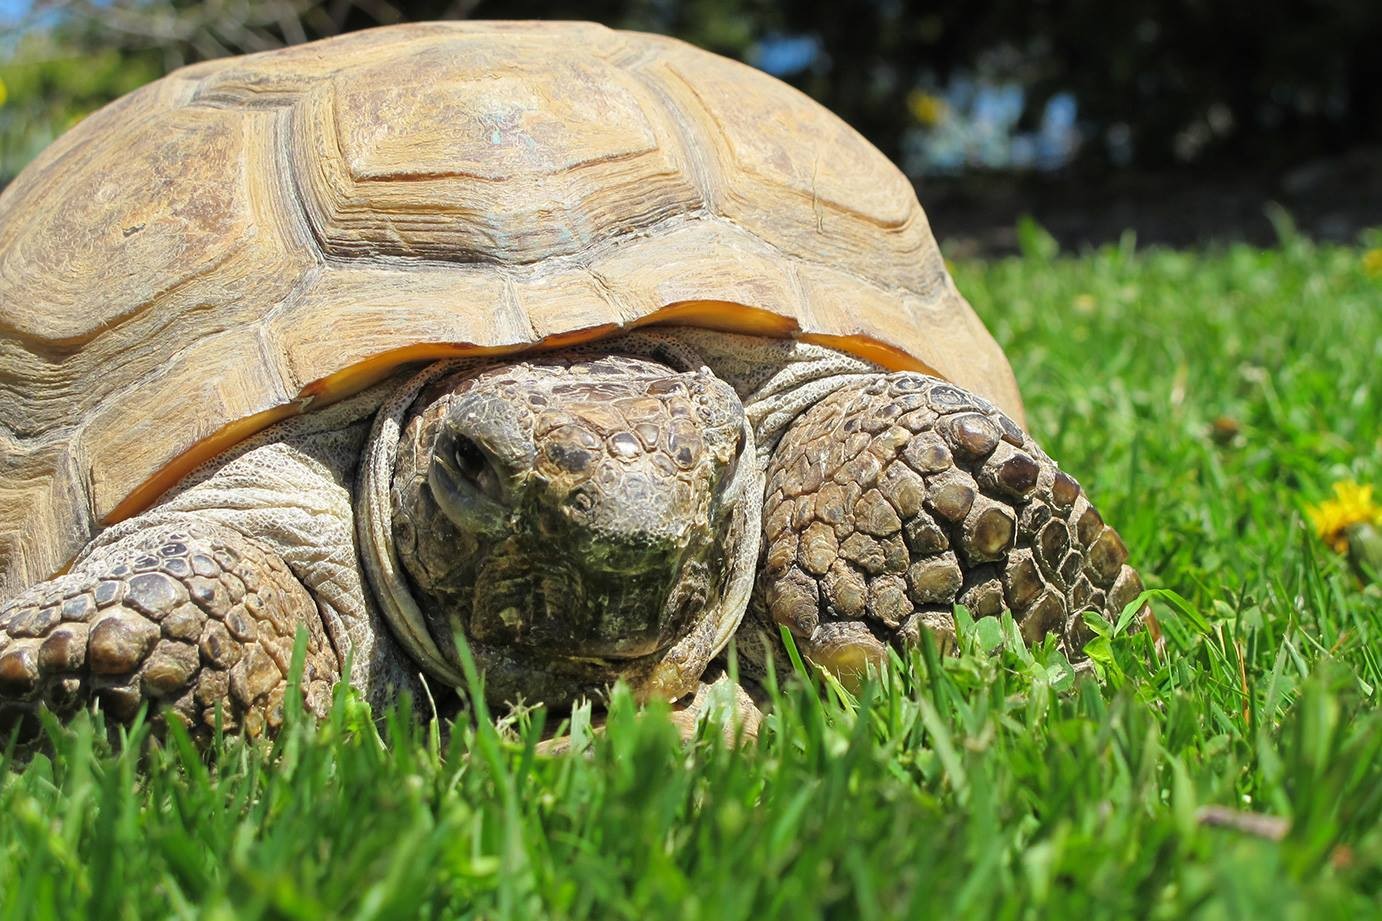 The tortoise and the hairball